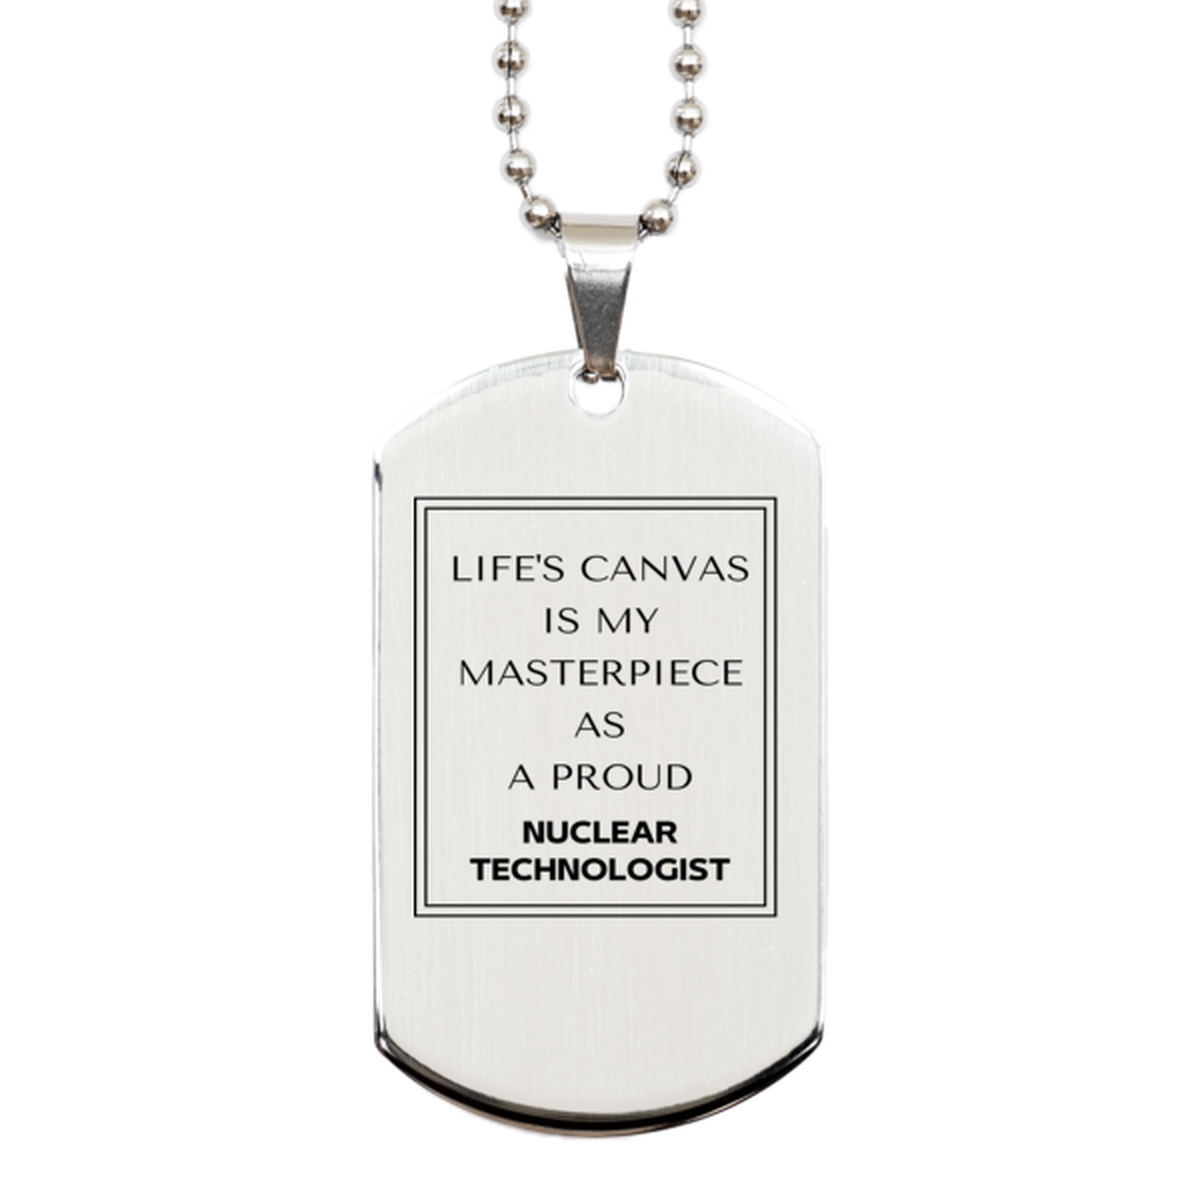 Proud Nuclear Technologist Gifts, Life's canvas is my masterpiece, Epic Birthday Christmas Unique Silver Dog Tag For Nuclear Technologist, Coworkers, Men, Women, Friends